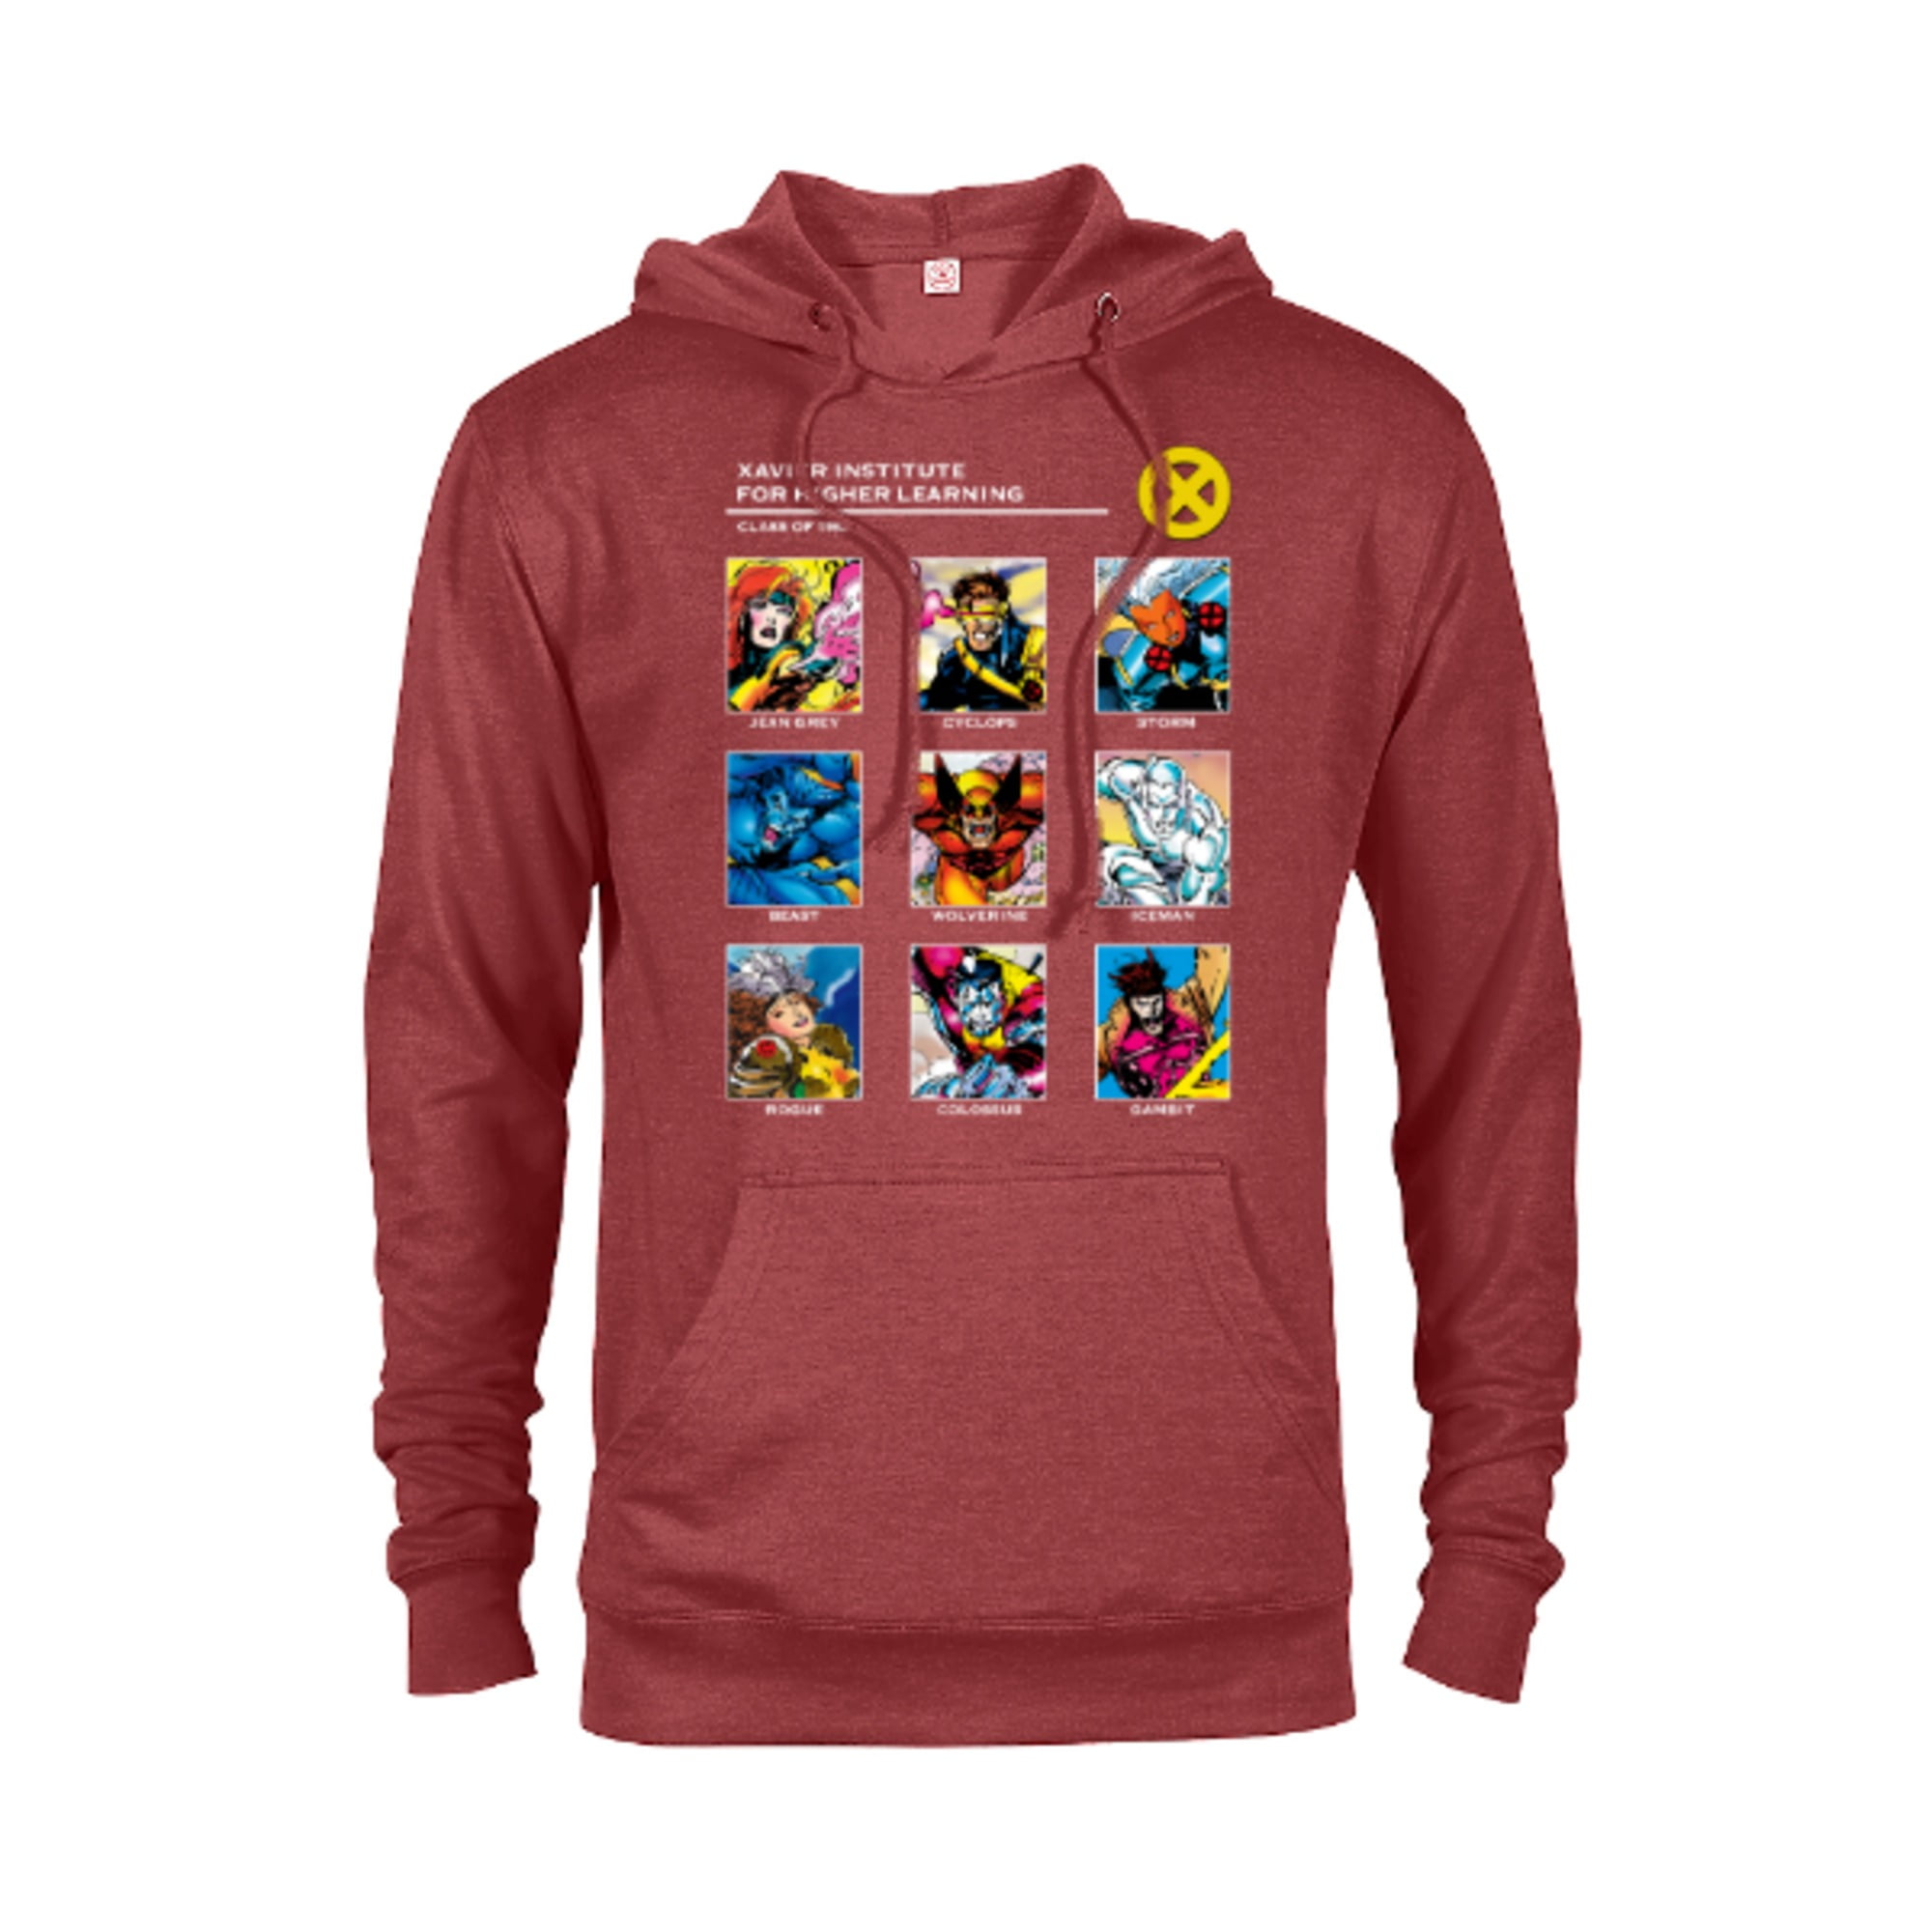 Marvel X-Men Xavier Institute 90s - Pullover Hoodie for Adults ...